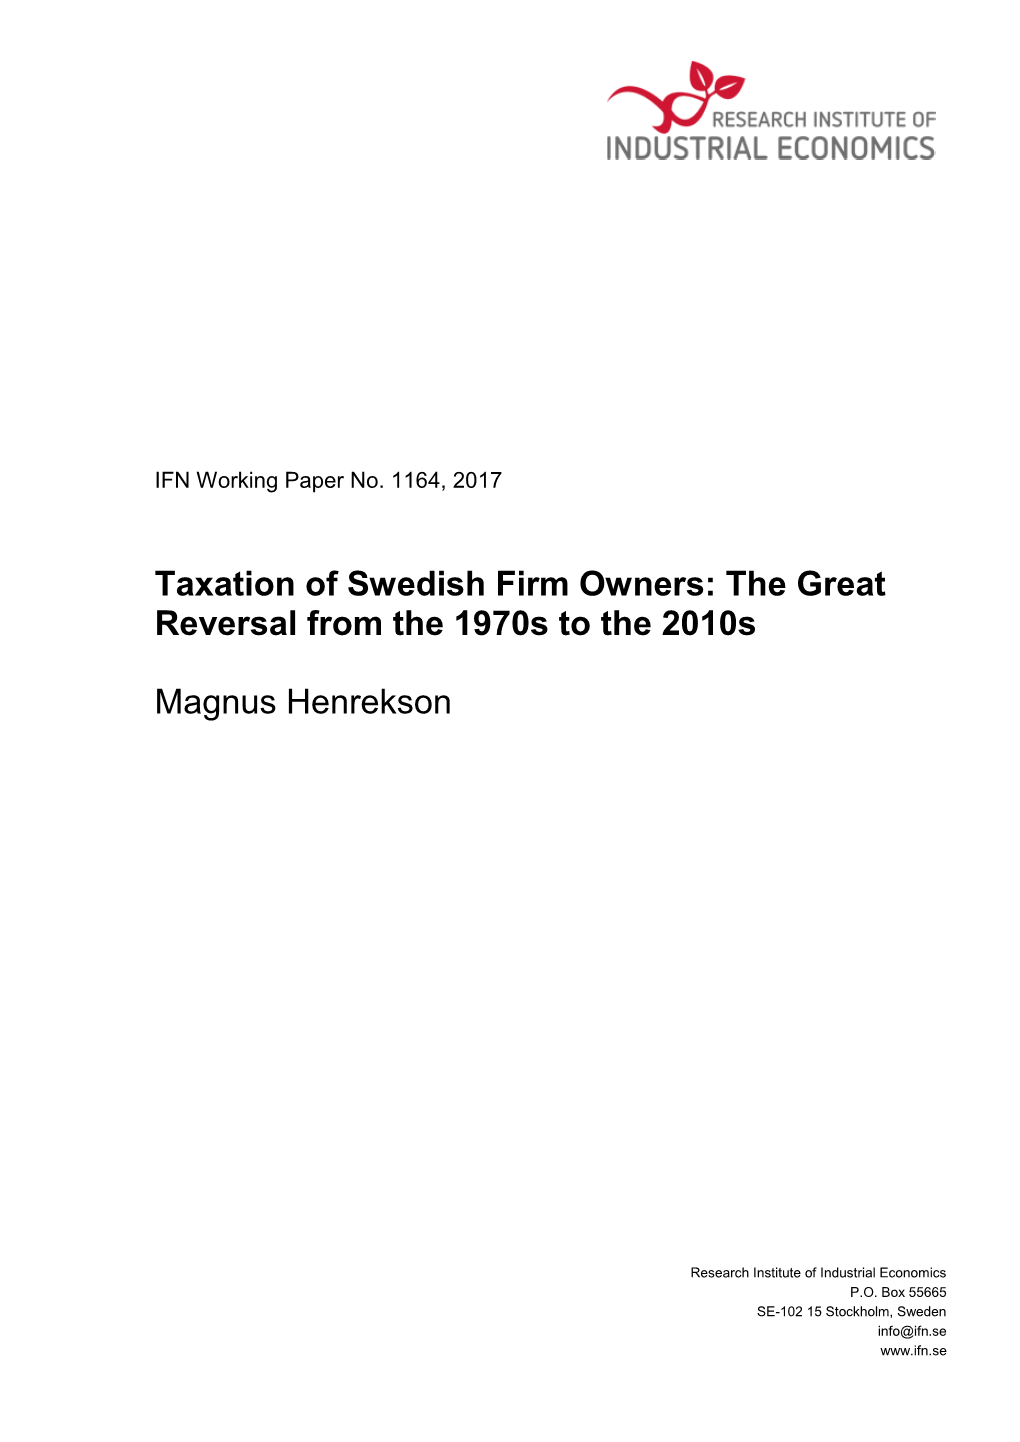 Taxation of Swedish Firm Owners: the Great Reversal from the 1970S to the 2010S